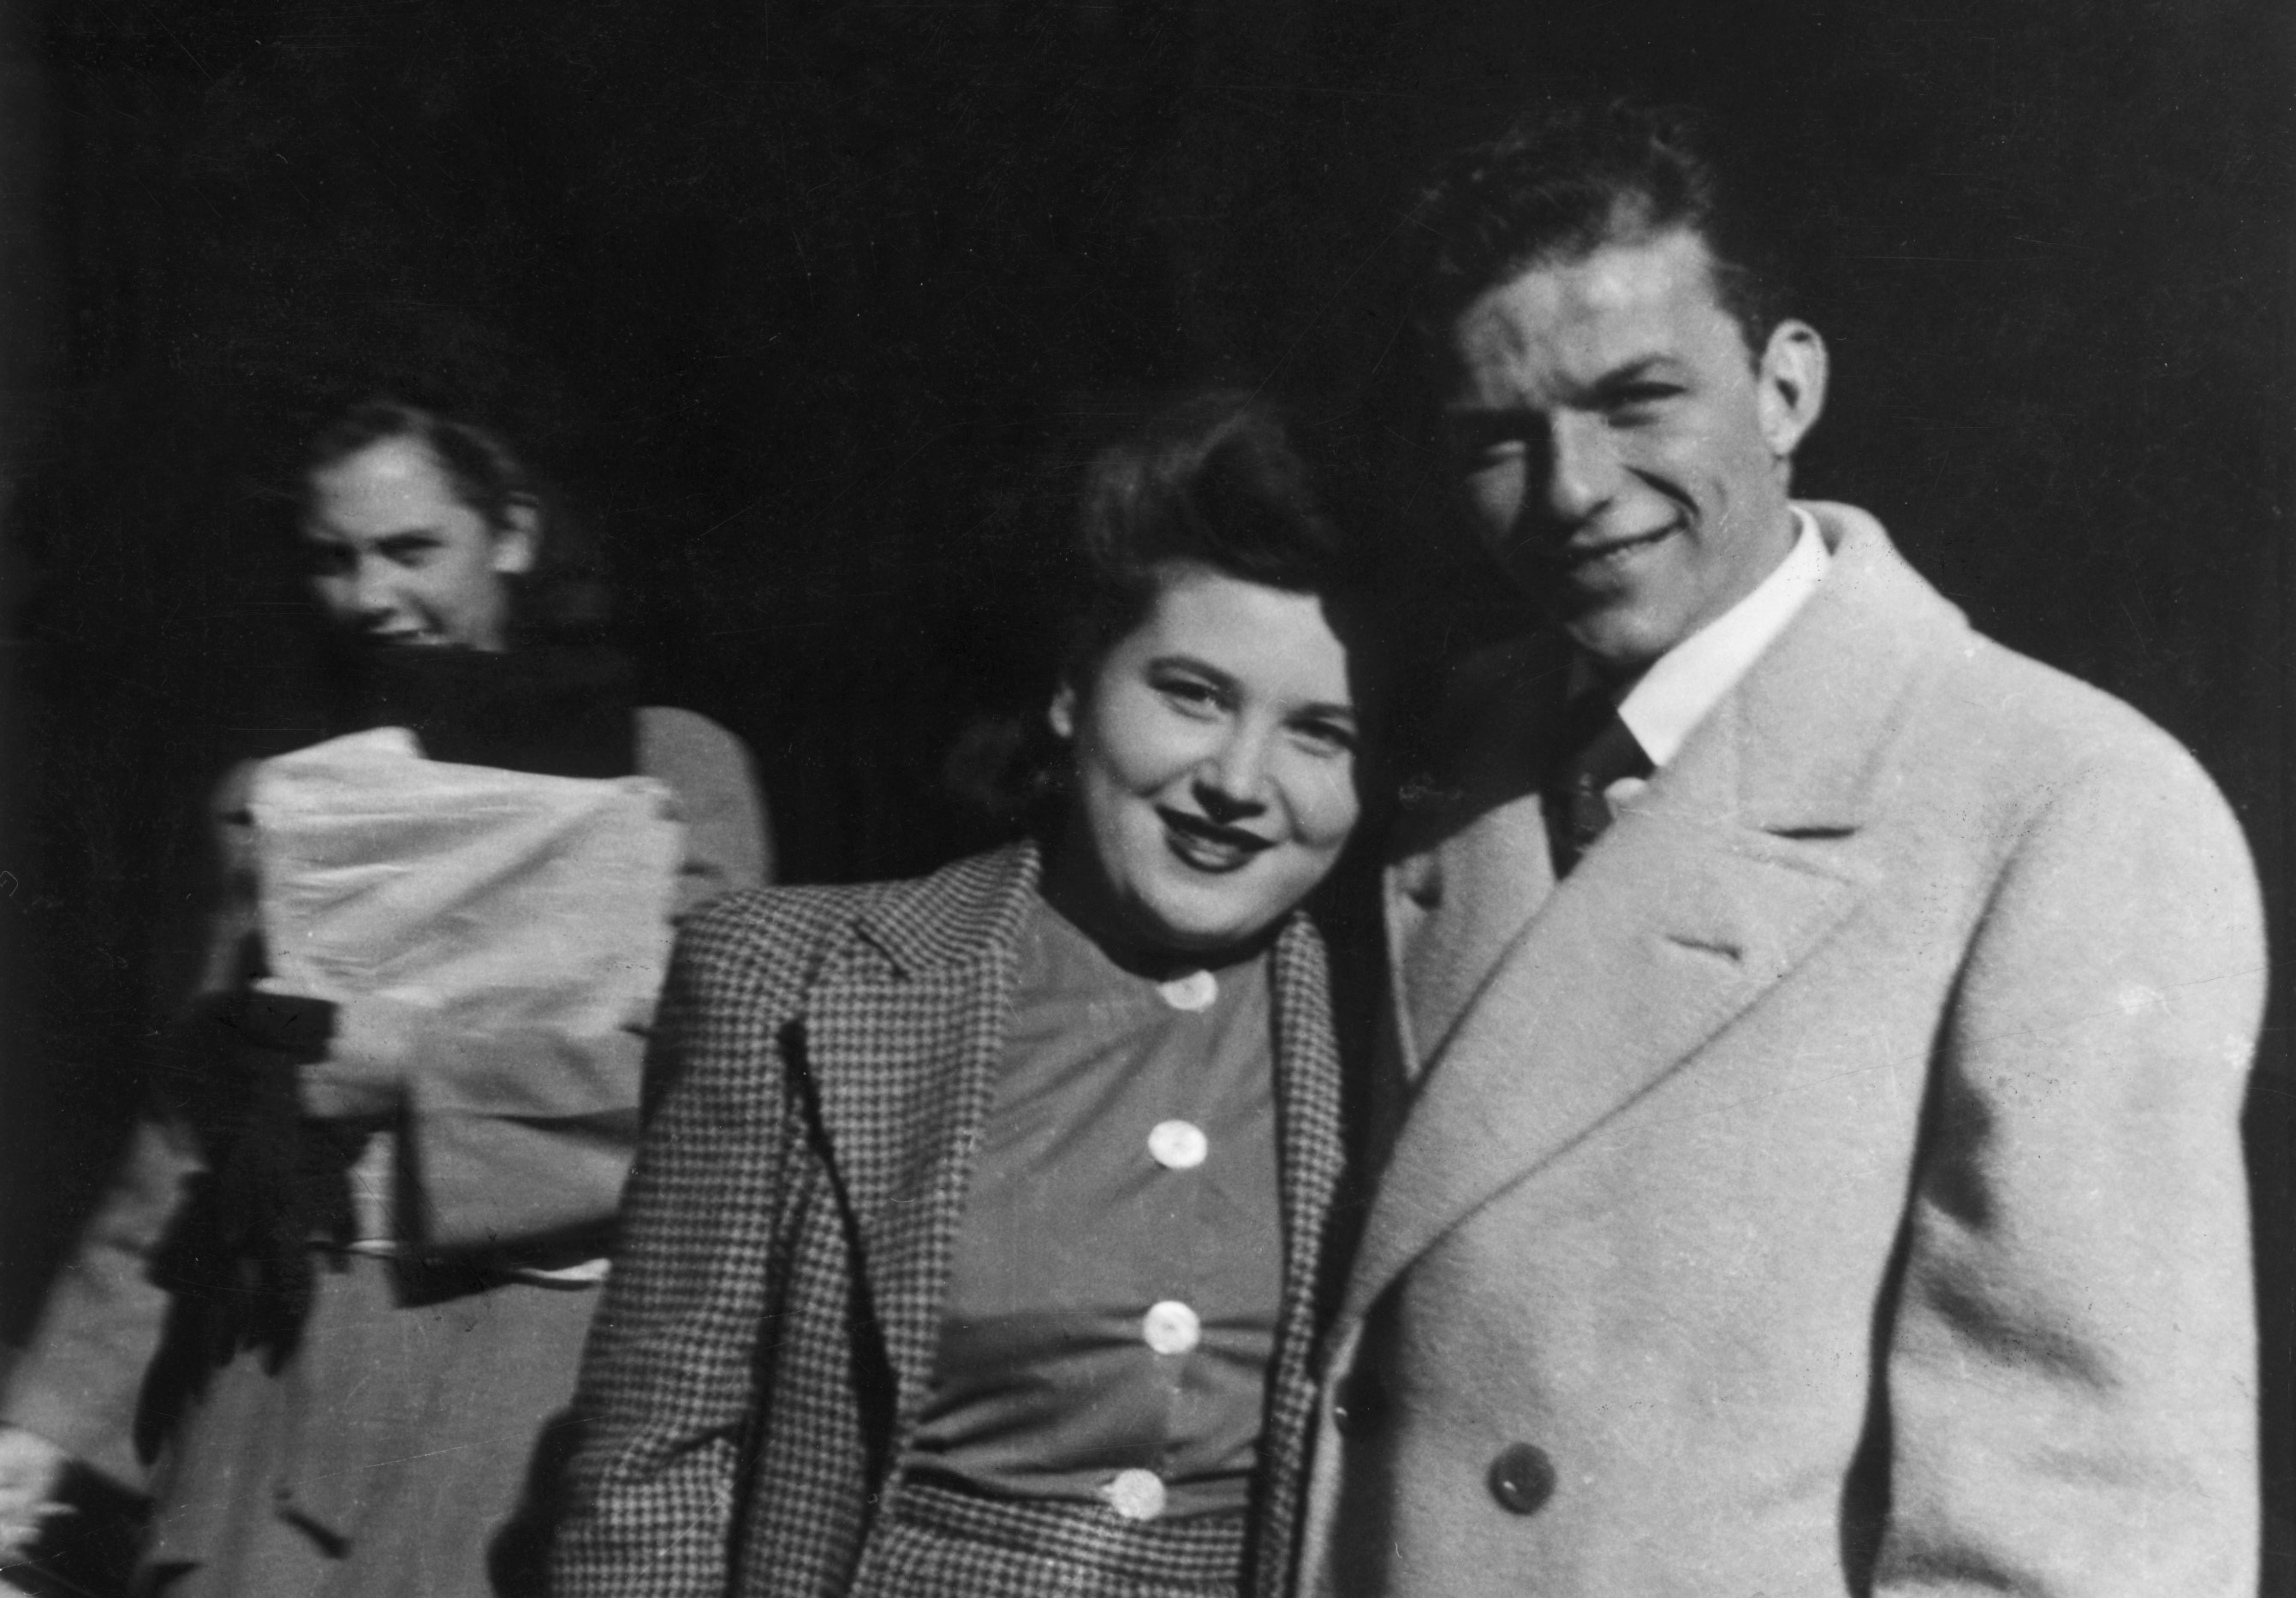 A black and white photo of Dolly Sinatra and Frank Sinatra wearing coats and standing outside.